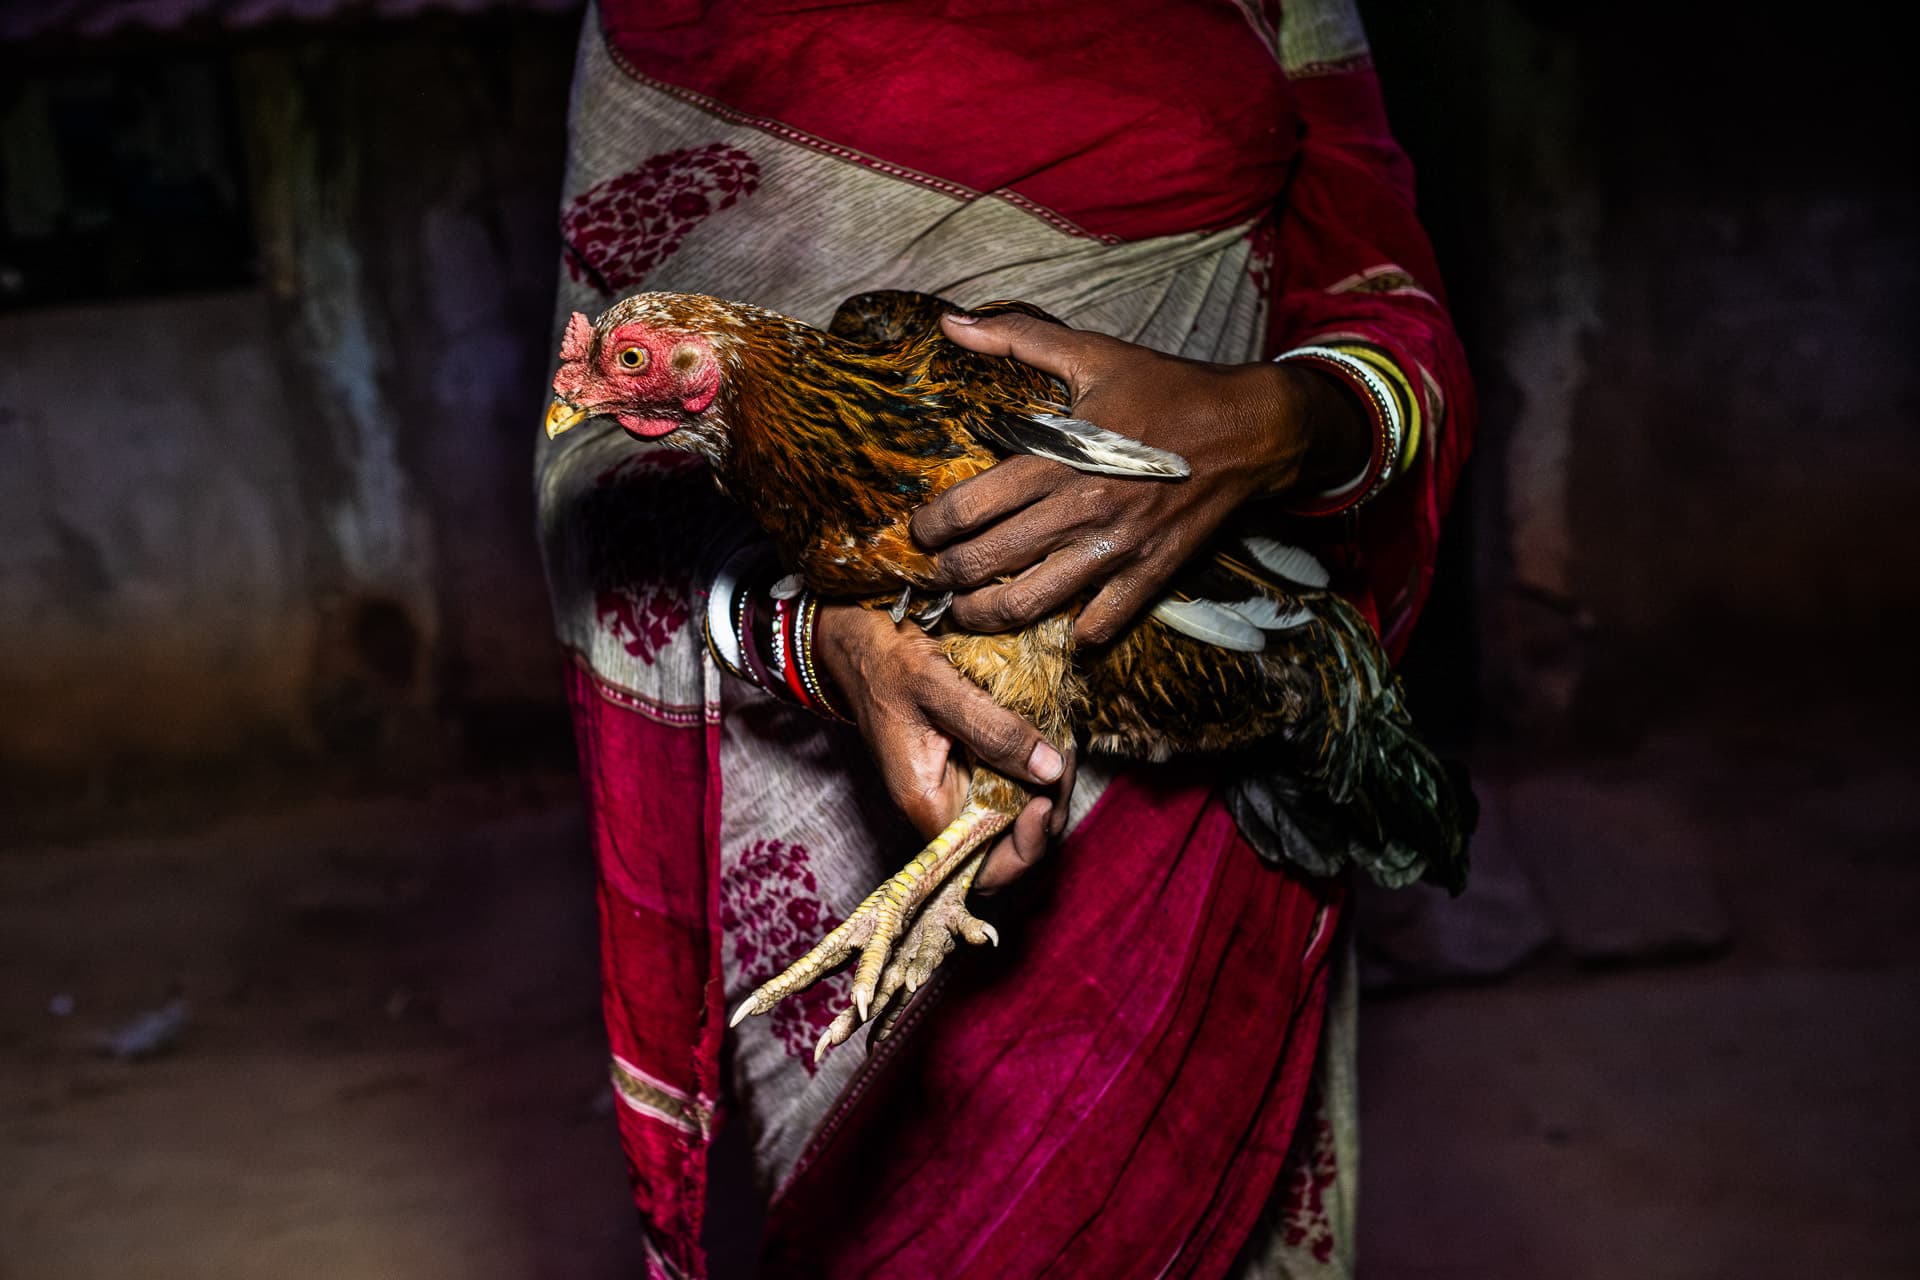 NGO photogrpaher in India - poultry vaccine